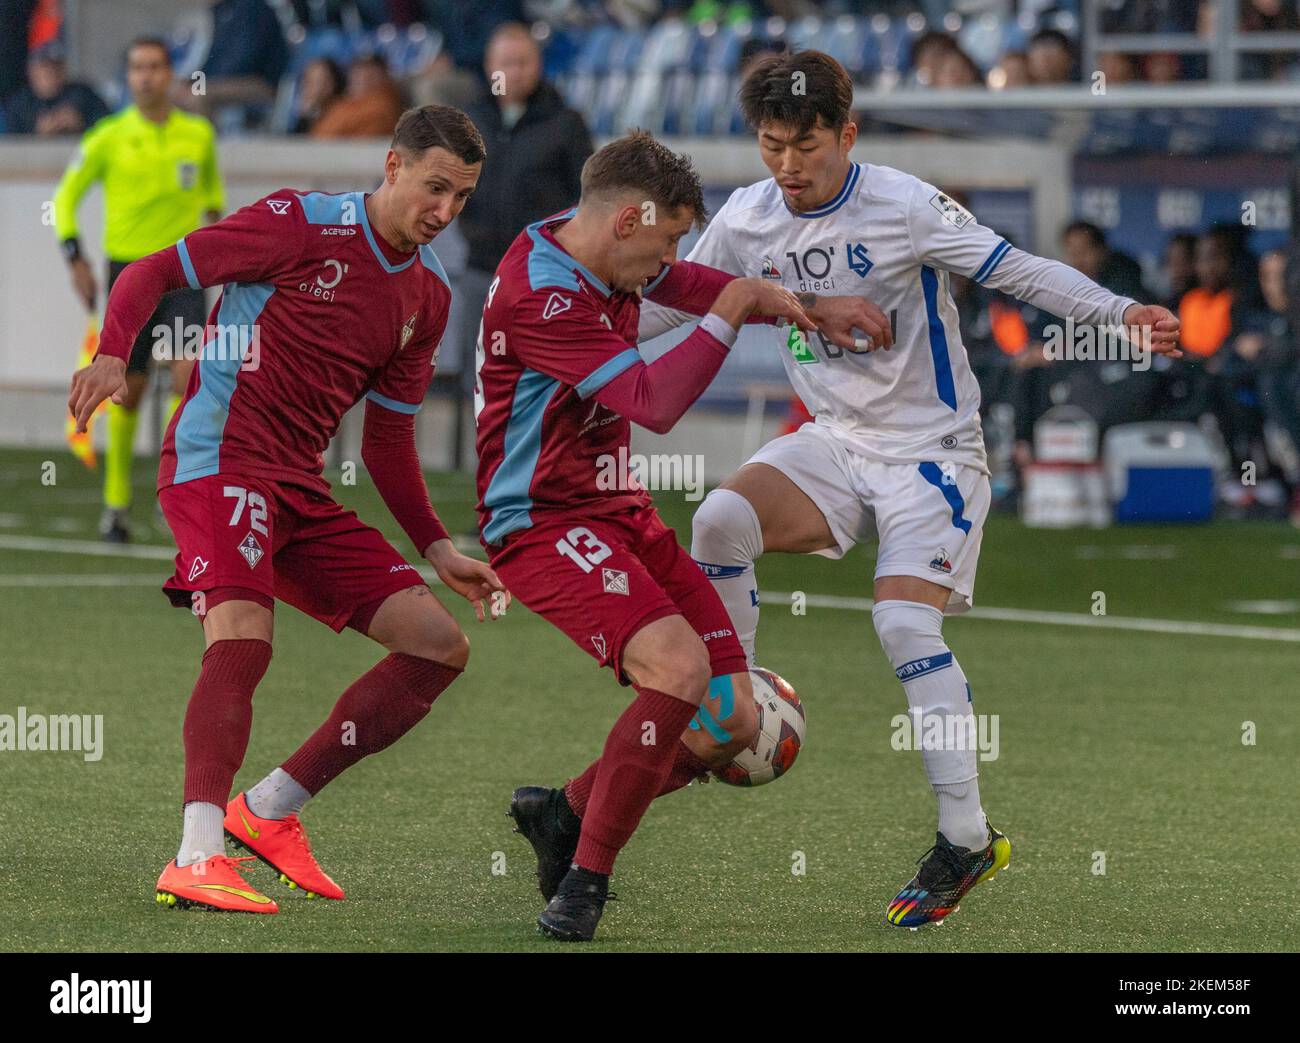 Lausanne Switzerland, 11/13/2022: Toichi Suzuki  (Middle) of Fc Lausanne-Sport (28) is in action during 16th day of the Challenge League 2022-2023. The Challenge League 2022-20223, took place at the Tuiliere stadium in Lausanne between Fc Lausanne-Sport and AC Bellinzona. Credit: Eric Dubost/Alamy Live News Stock Photo